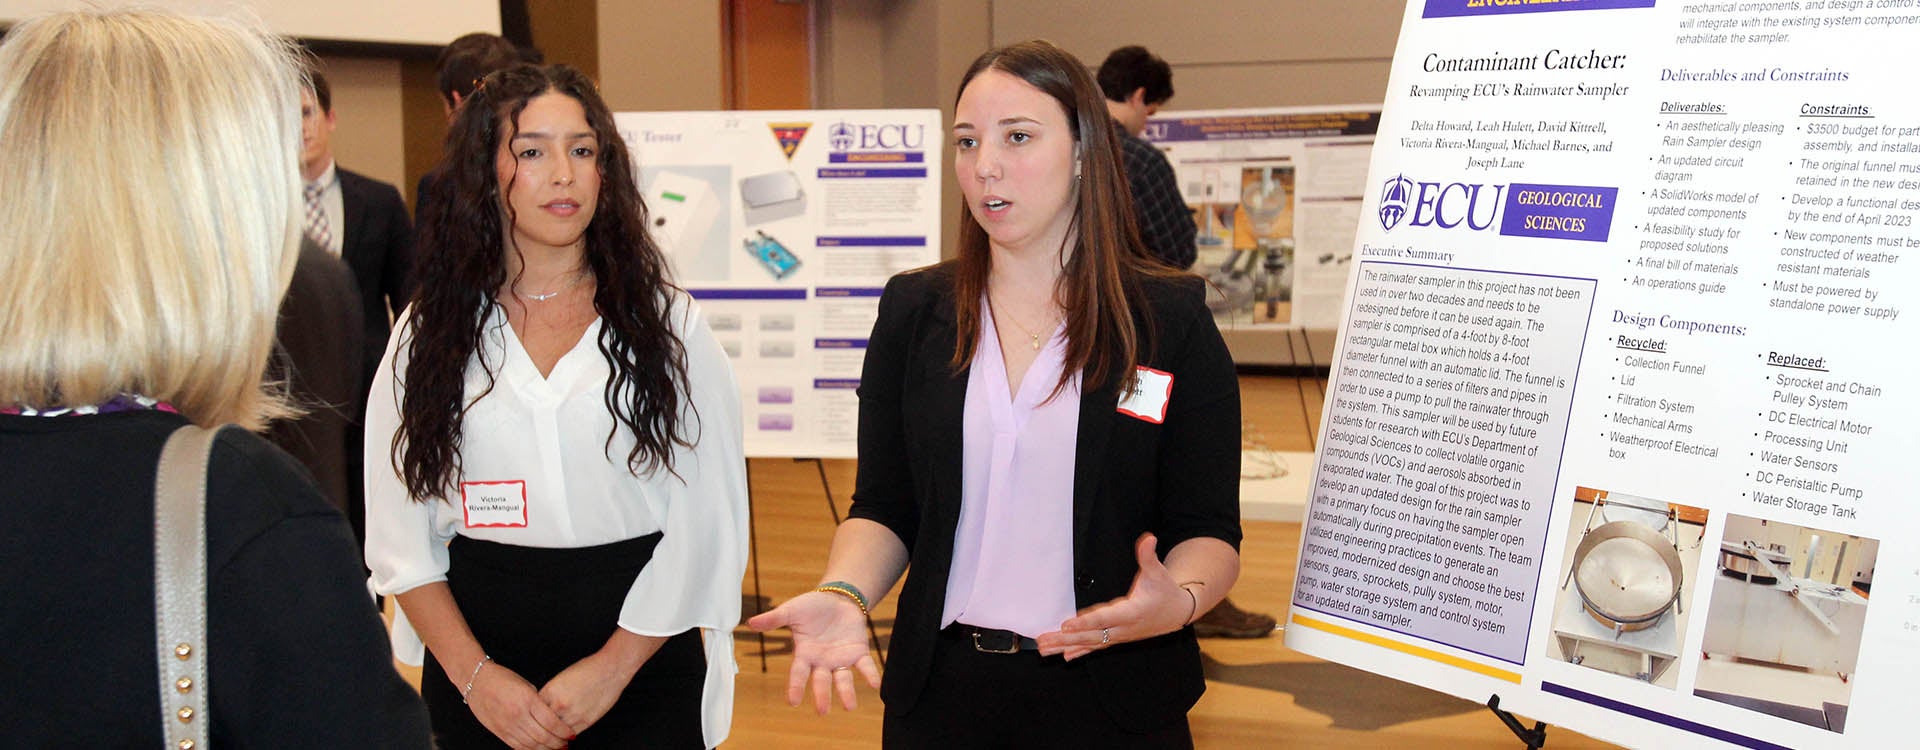 Engineering students Leah Hulett, right, and Victoria Rivera-Mangual explain their rainwater sampler project during the Engineering Capstone Symposium at the Main Campus Student Center. (Photos by Ken Buday)